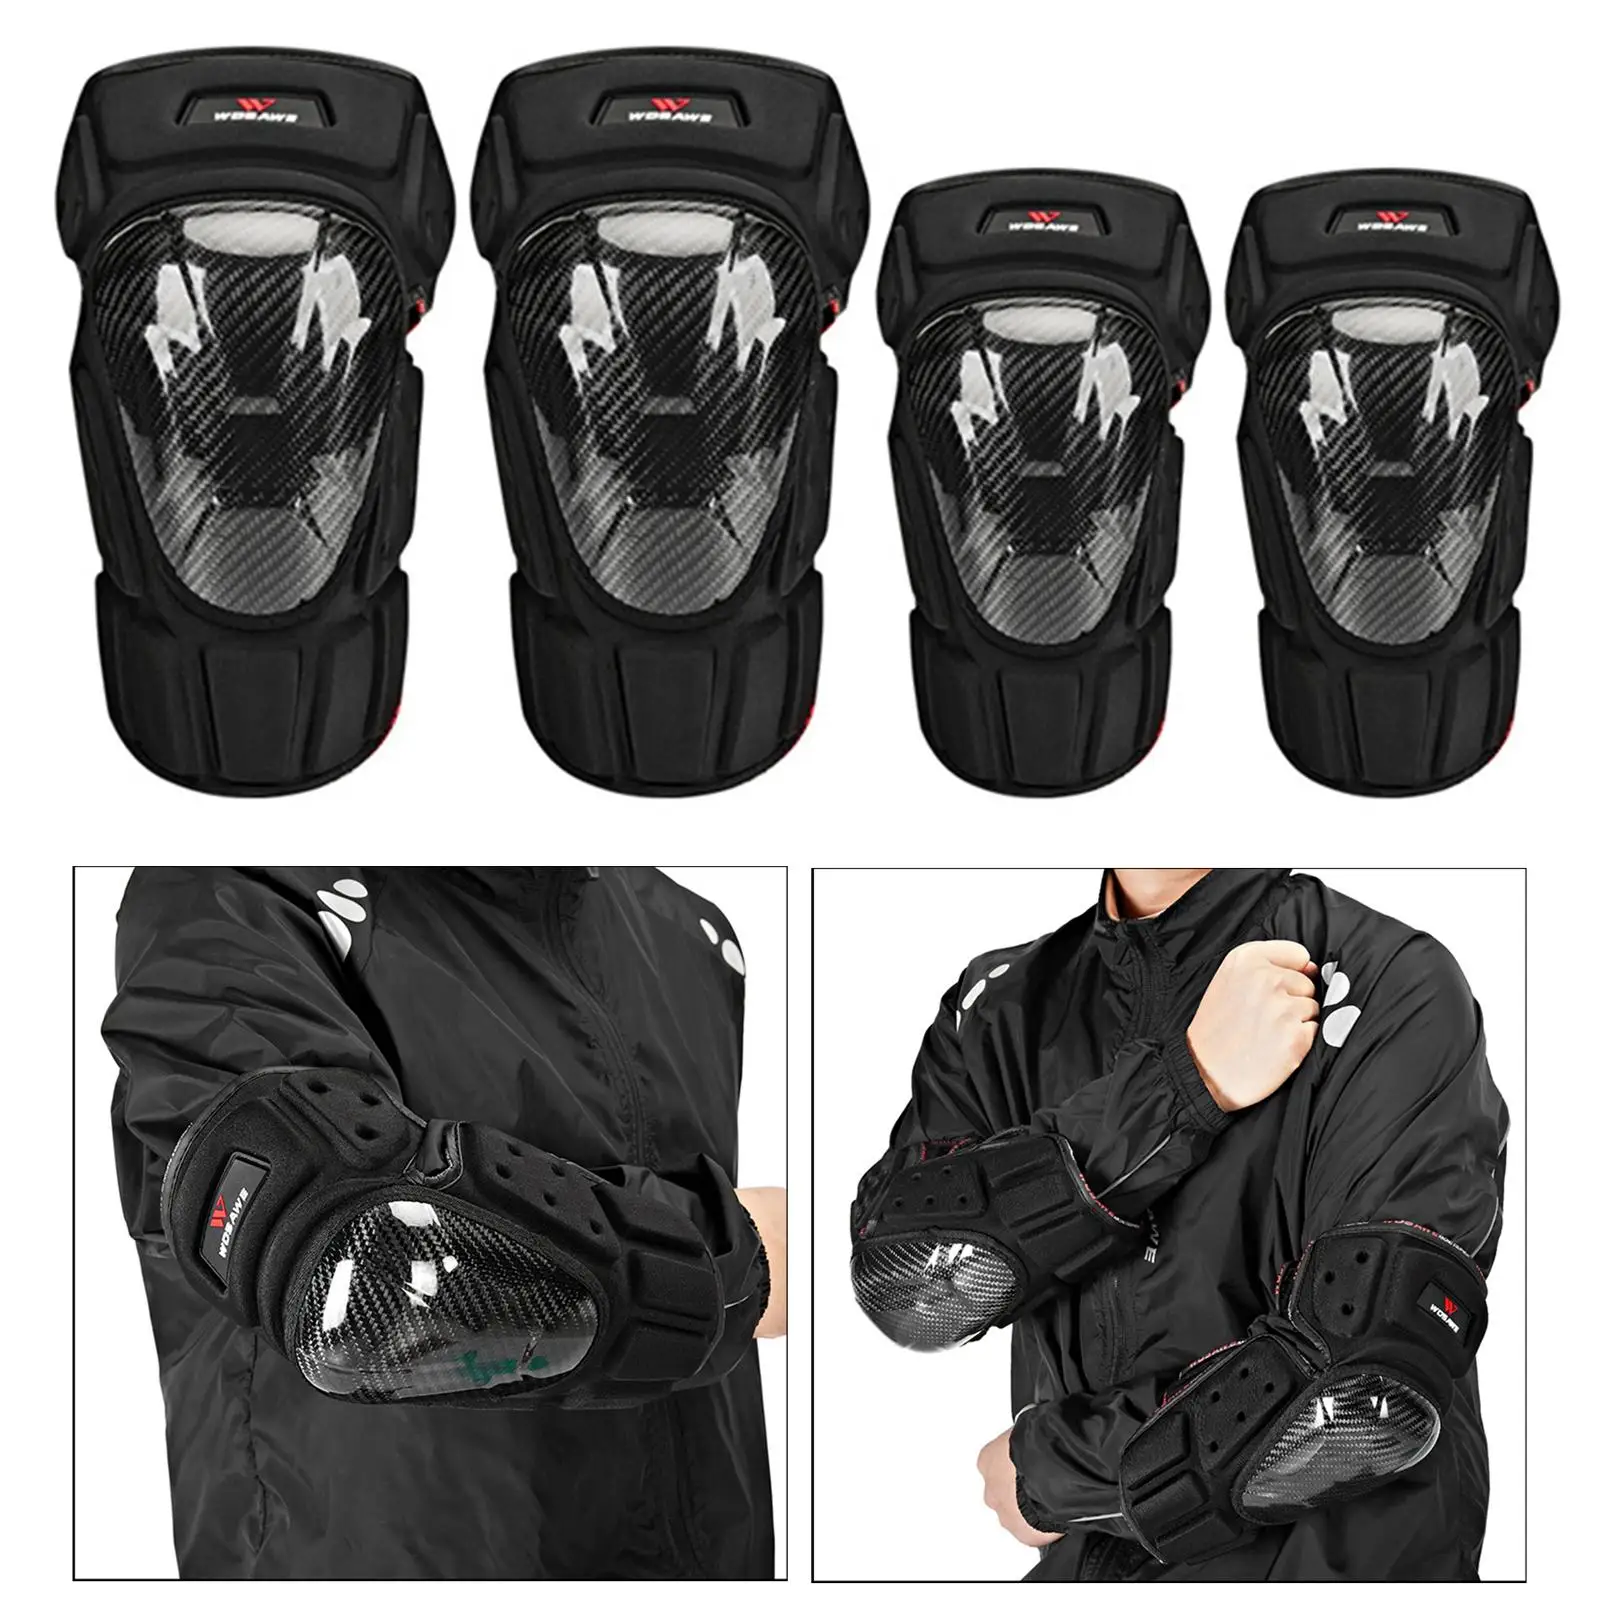 Motorcycle Elbow Knee Pads Motocross Knee Protector Guard Protective Gears